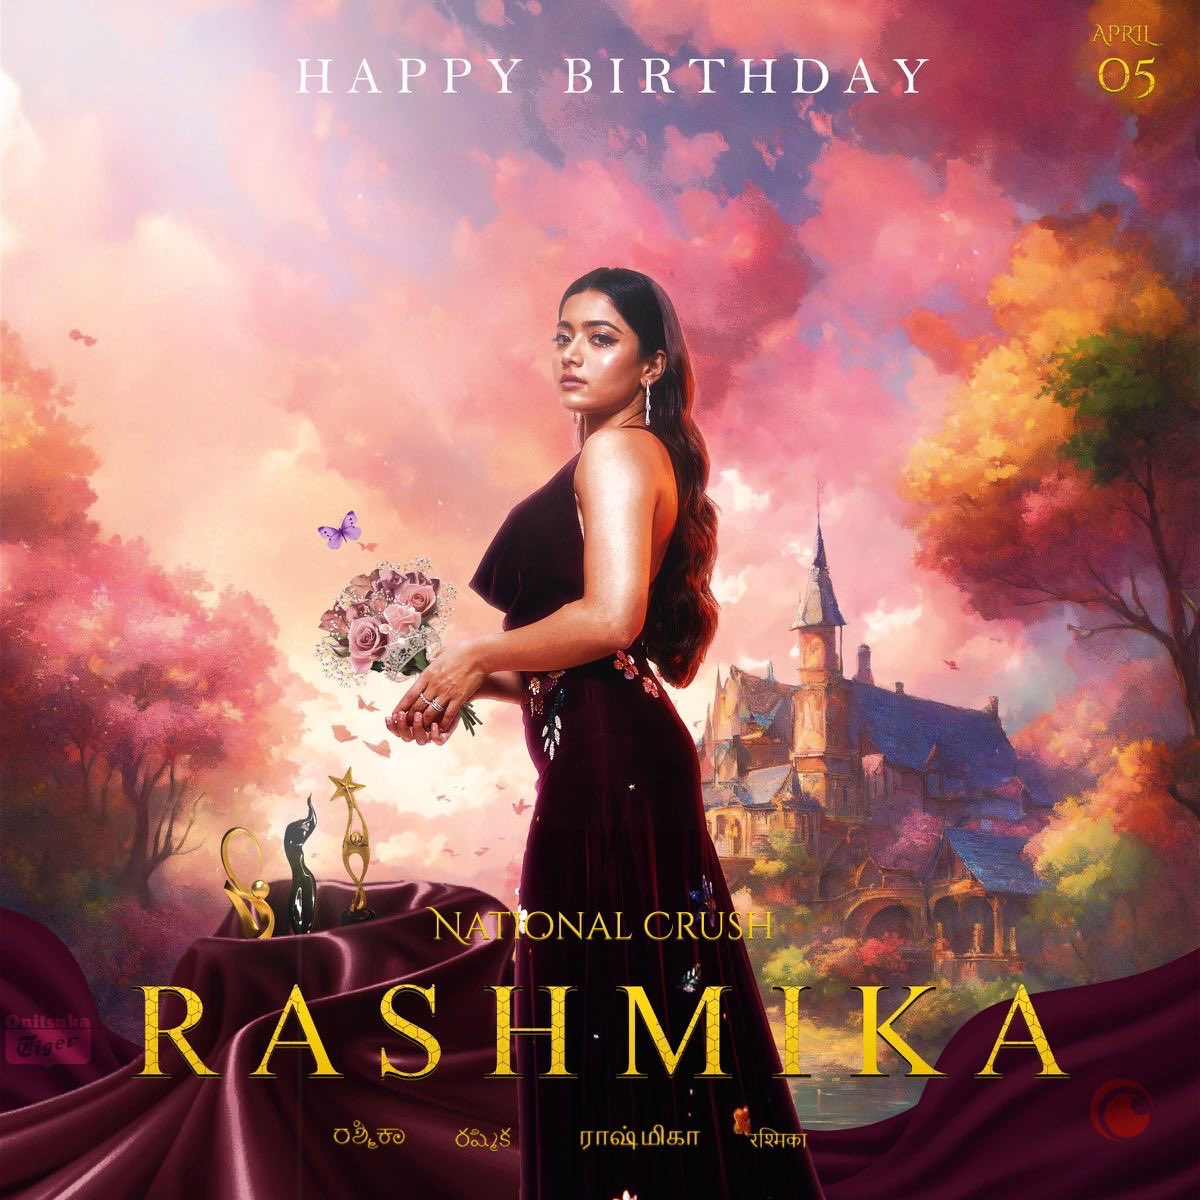 Happy to reveal the birthday CDP of our Cutest Pan India Star @iamRashmika♥️ Lots of love & advance birthday wishes doll ♥️ May your special day be filled with joy, laughter, and endless blessings wishing you a sensational Happy Birthday 🫶 #HappyBirthdayRashmika…